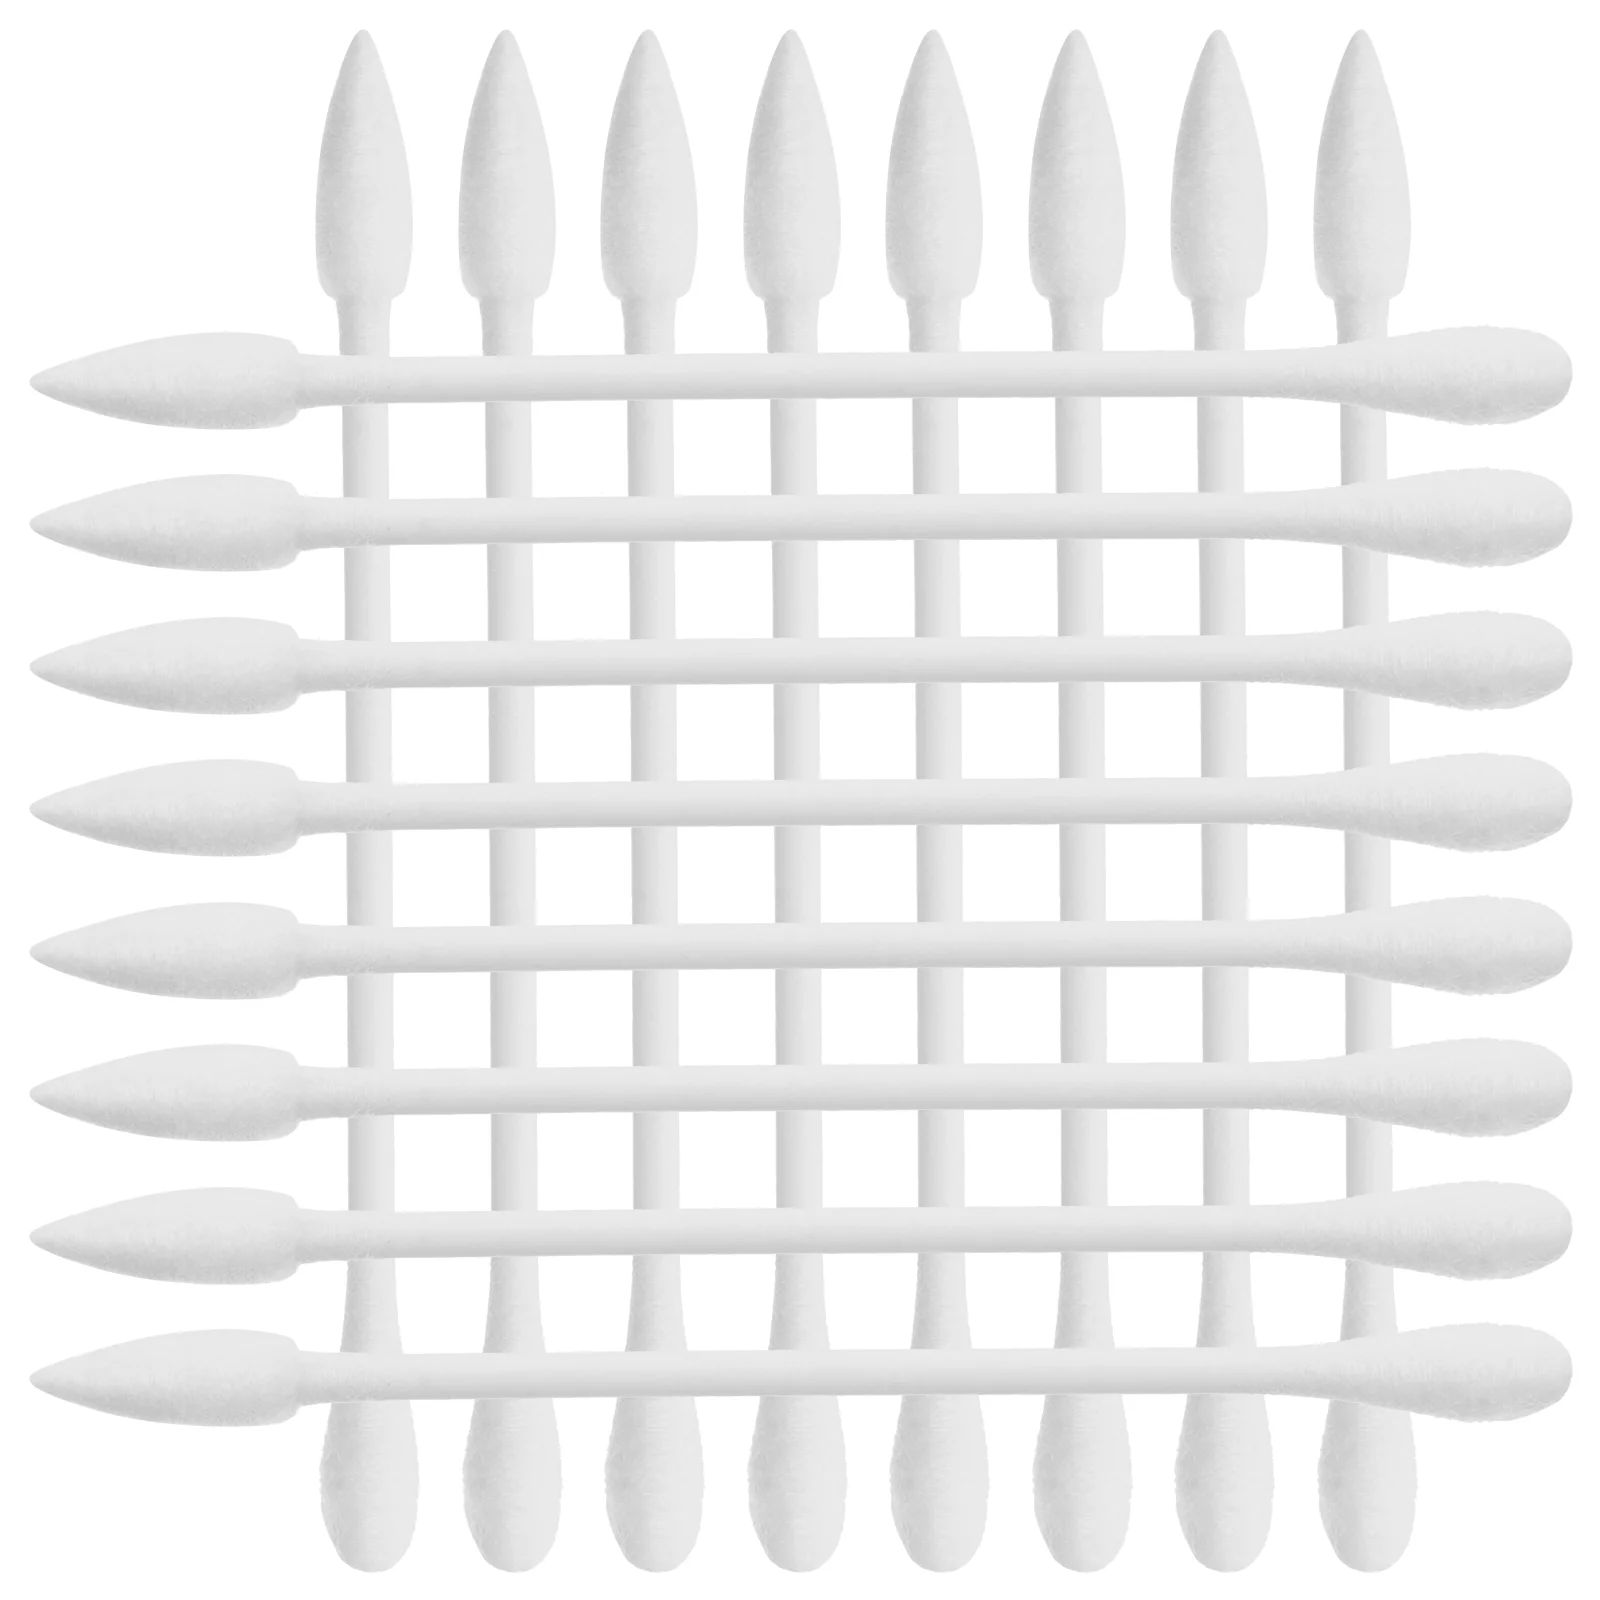 

30pcs Cotton Swabs Disposable Cotton Swabs Double Heads Cotton Swabs Ear Clean Tools